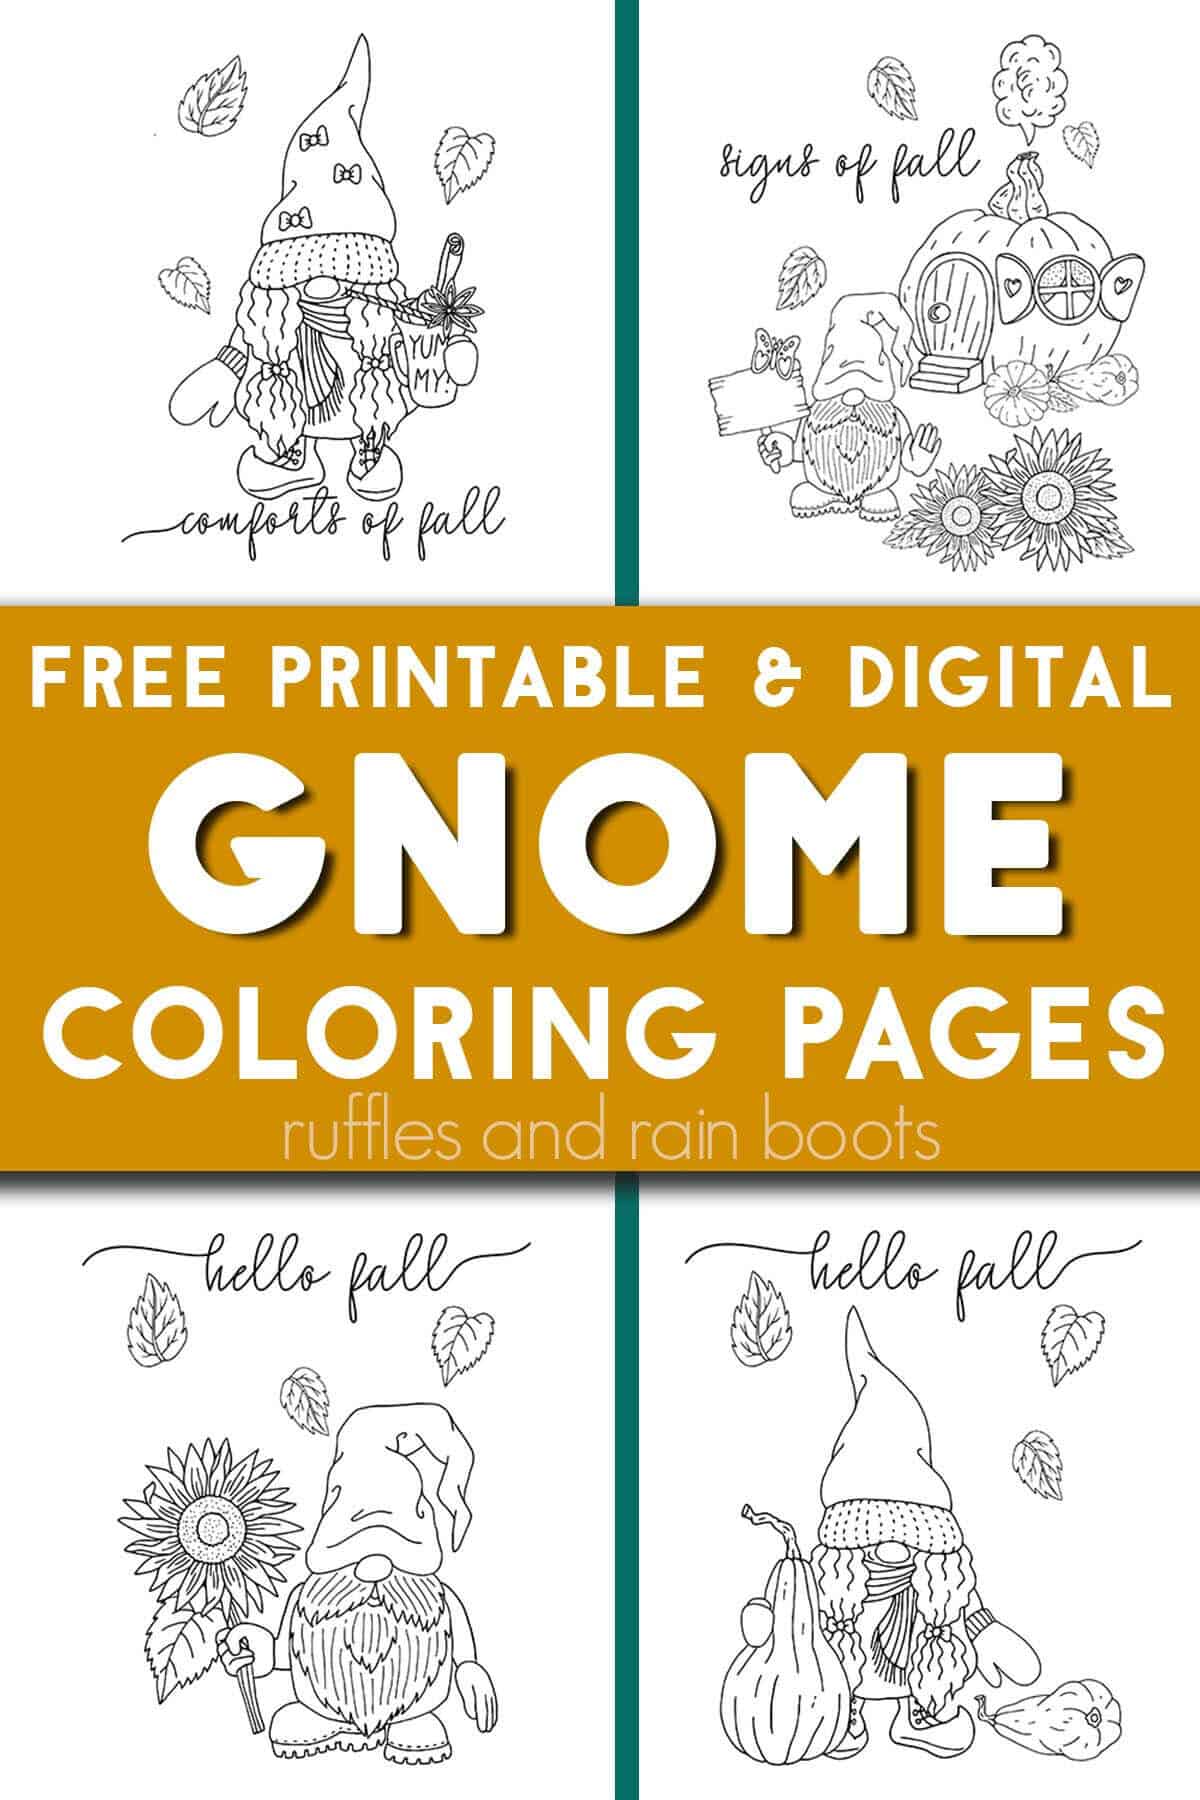 Gnome coloring pages both printable and digital